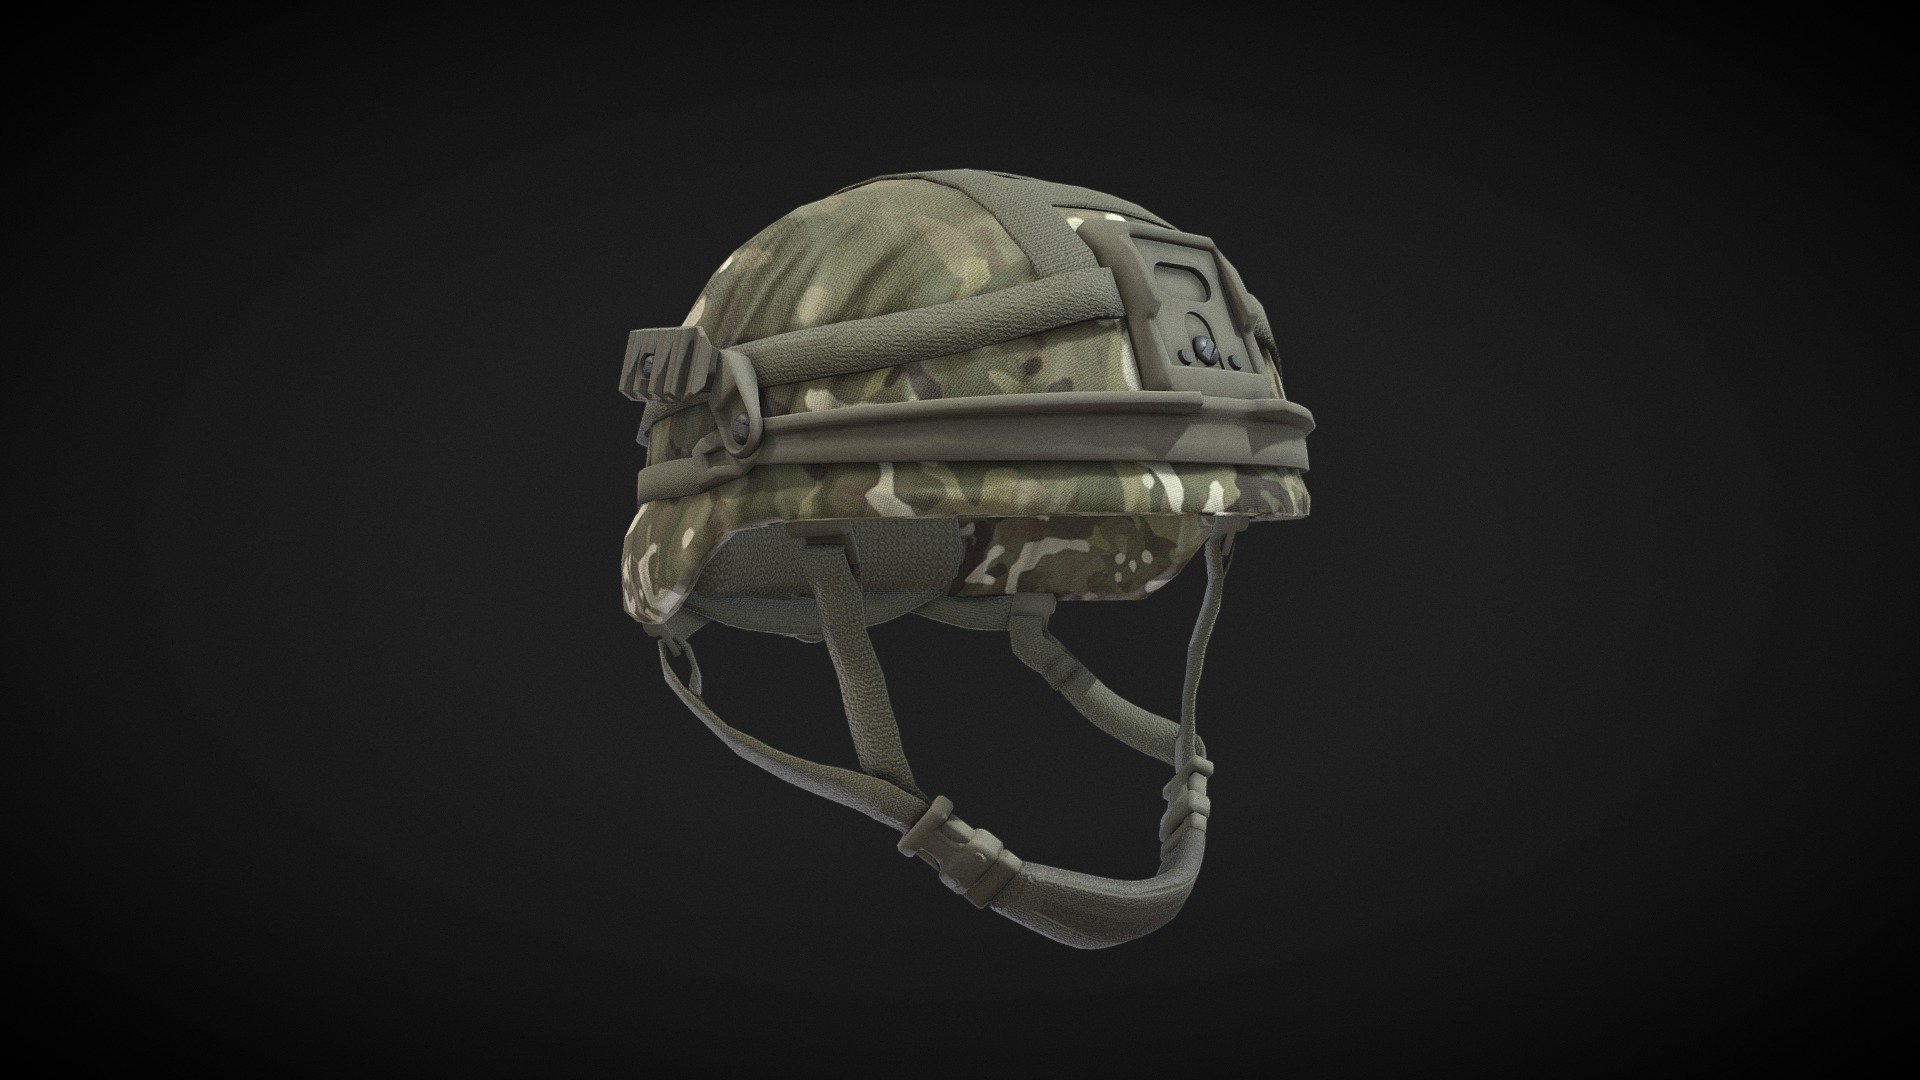 British Military Virtus Helmet -  Model/Art by Outworld Studios

Must give credit to Outworld Studios if using the asset.

Show support by joining my discord: https://discord.gg/EgWSkp8Cxn - British Military Virtus Helmet - Buy Royalty Free 3D model by Outworld Studios (@outworldstudios) 3d model